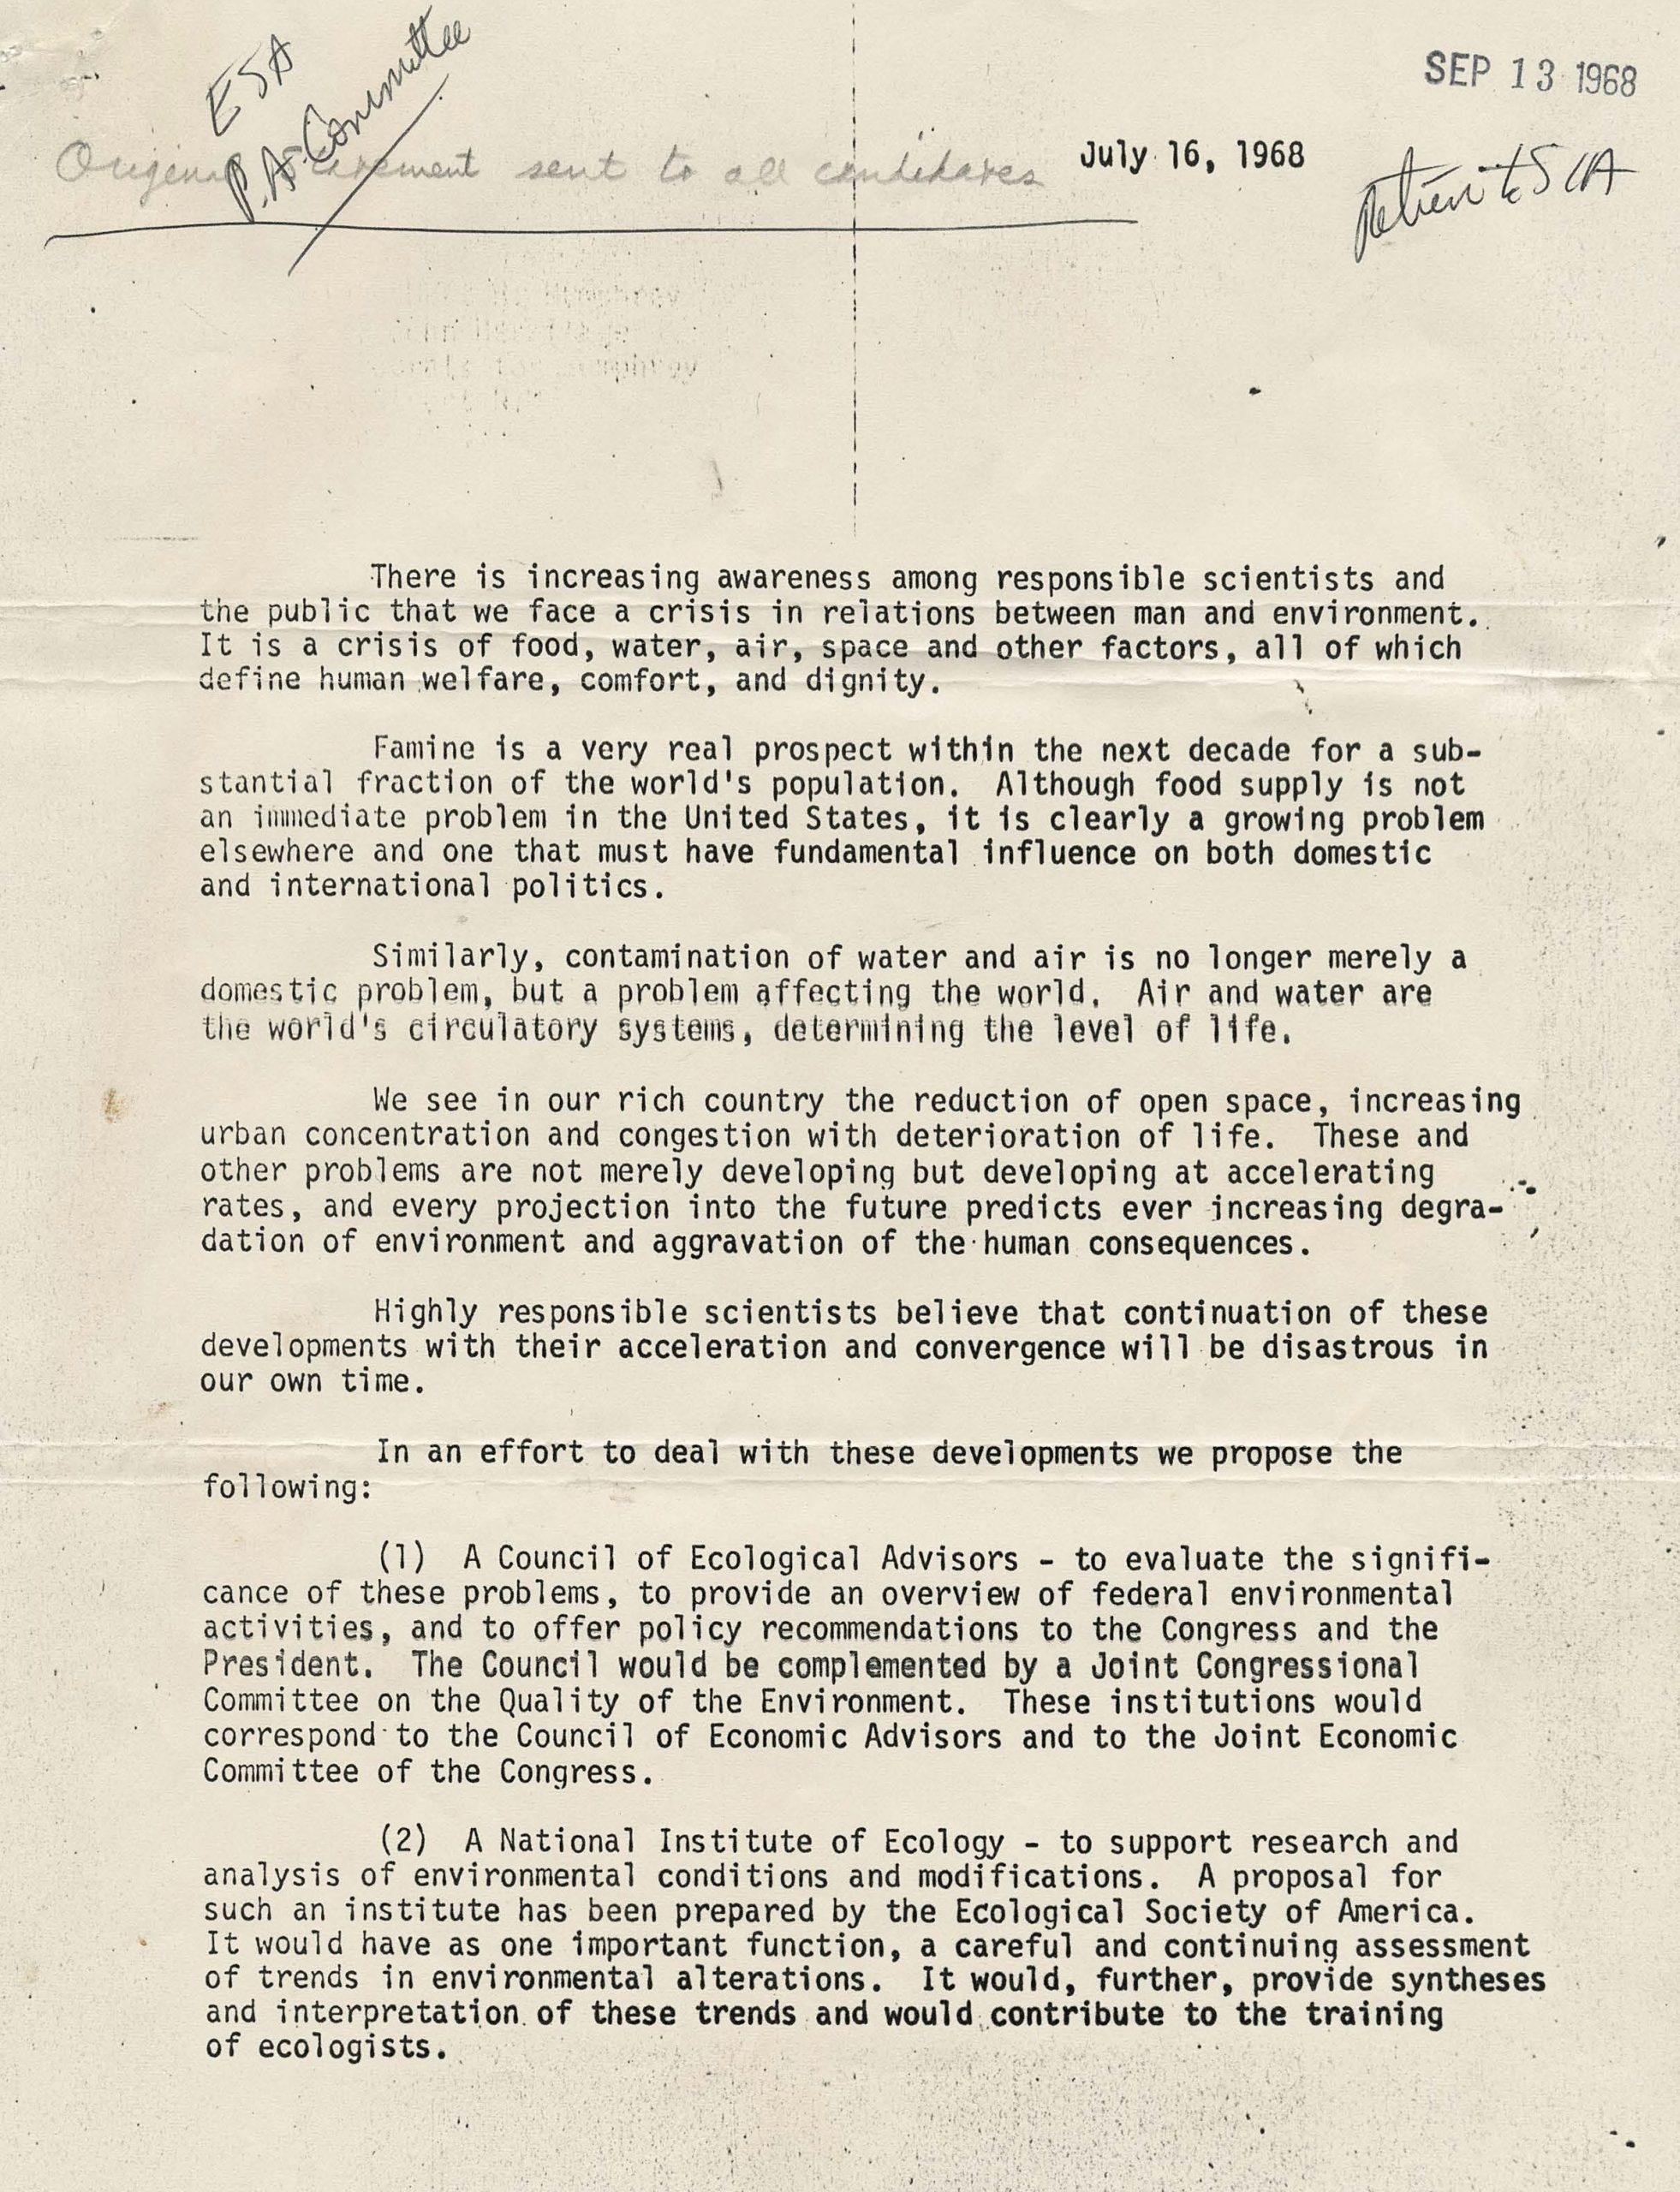 Image of a document. A black and white.